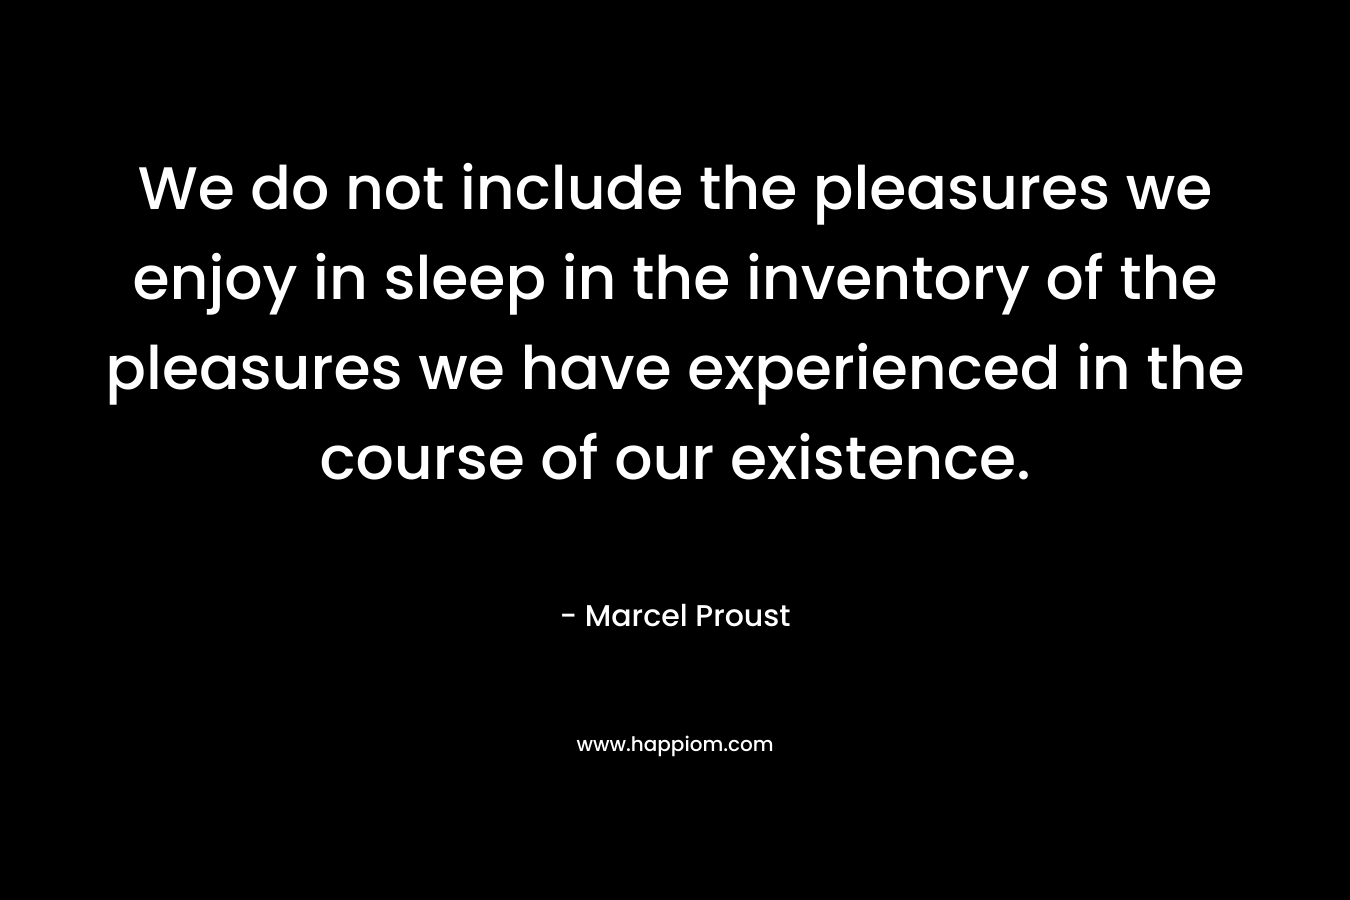 We do not include the pleasures we enjoy in sleep in the inventory of the pleasures we have experienced in the course of our existence.